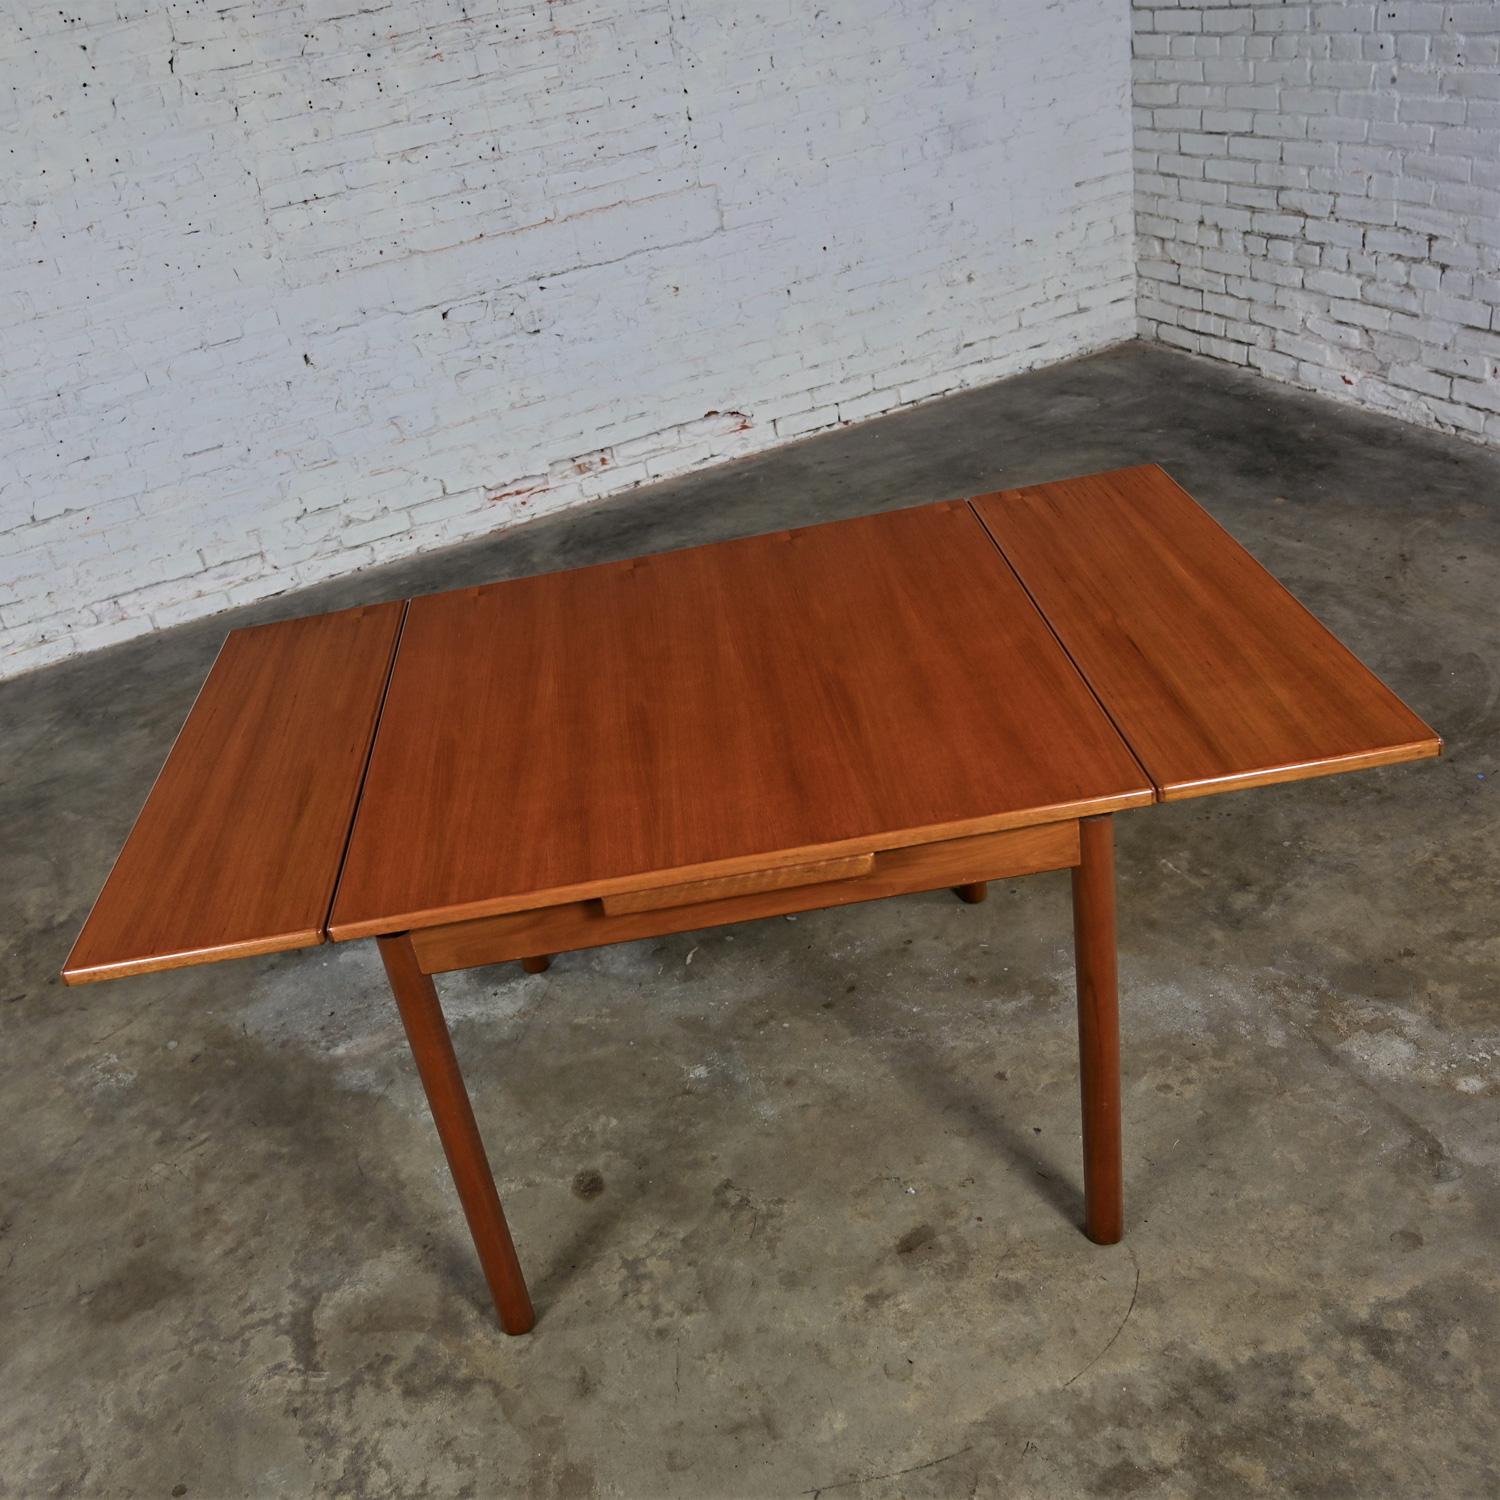 Scandinavian Modern Style Teak Square Extension Dining Table Made in Singapore For Sale 1